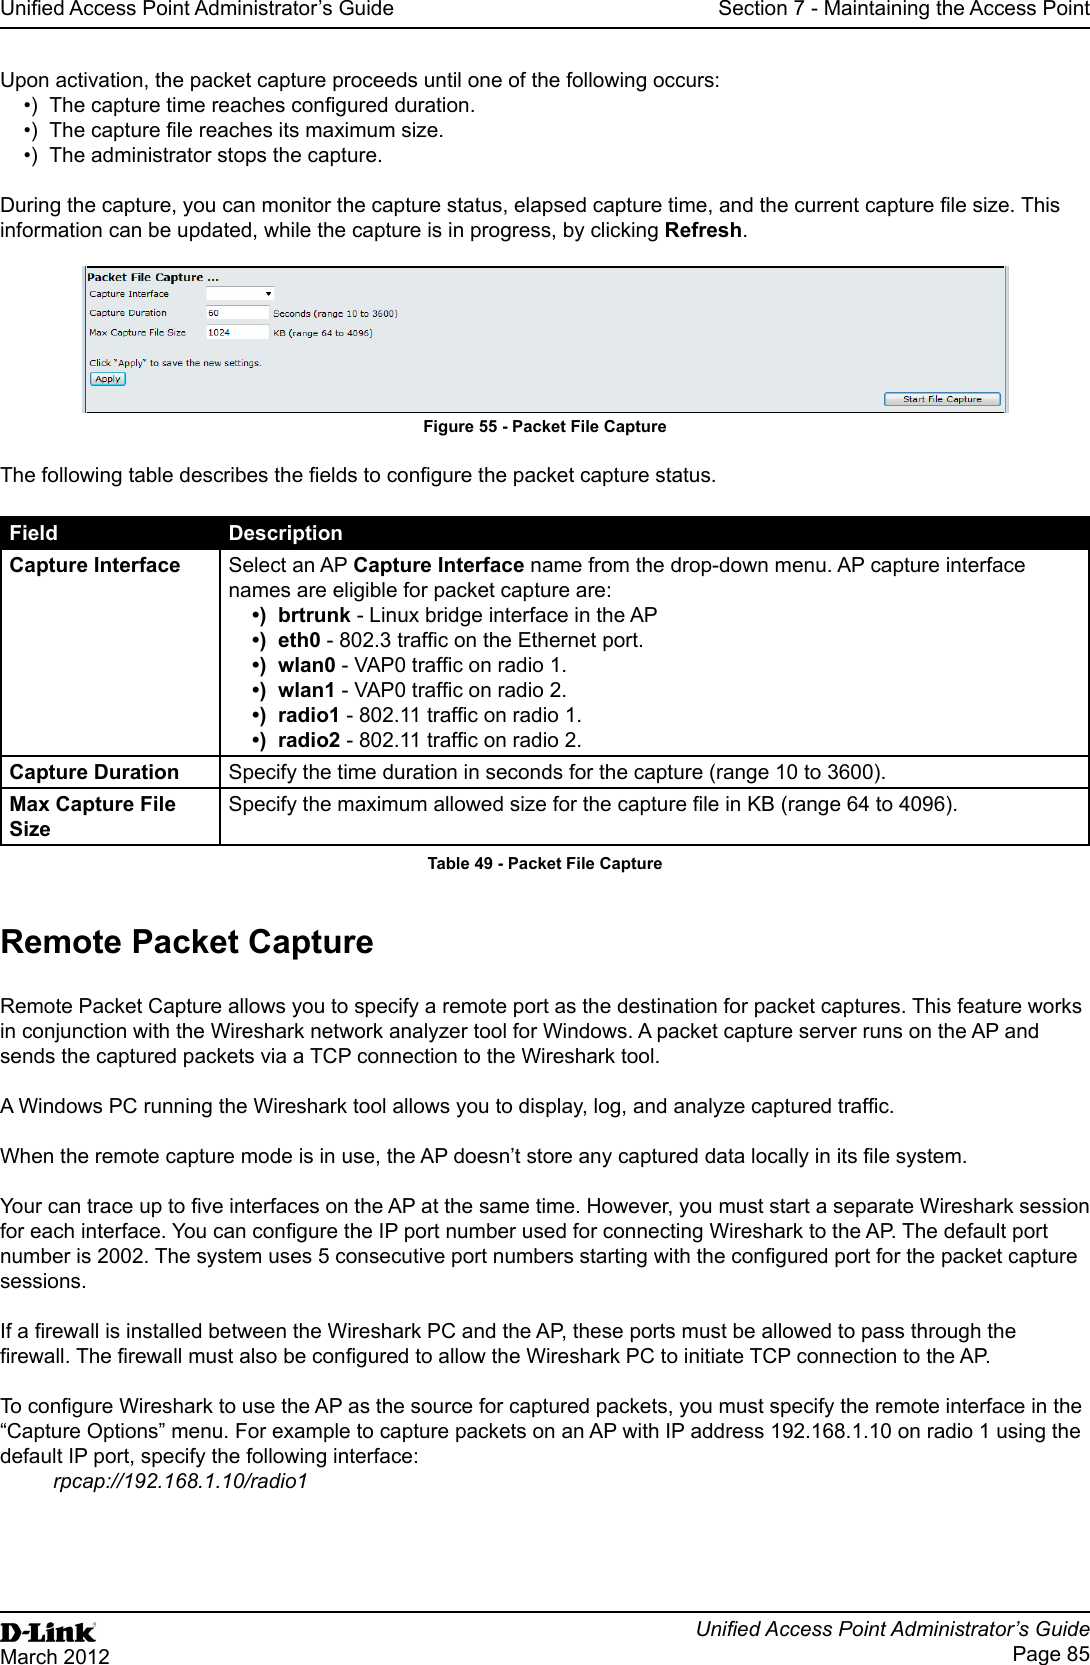 Unied Access Point Administrator’s GuideUnied Access Point Administrator’s GuidePage 85March 2012Section 7 - Maintaining the Access PointUpon activation, the packet capture proceeds until one of the following occurs:•)  The capture time reaches congured duration.•)  The capture le reaches its maximum size.•)  The administrator stops the capture.During the capture, you can monitor the capture status, elapsed capture time, and the current capture le size. This information can be updated, while the capture is in progress, by clicking Refresh.Figure 55 - Packet File CaptureThe following table describes the elds to congure the packet capture status.Field DescriptionCapture Interface Select an AP Capture Interface name from the drop-down menu. AP capture interface names are eligible for packet capture are:•)  brtrunk - Linux bridge interface in the AP•)  eth0 - 802.3 trafc on the Ethernet port.•)  wlan0 - VAP0 trafc on radio 1.•)  wlan1 - VAP0 trafc on radio 2.•)  radio1 - 802.11 trafc on radio 1.•)  radio2 - 802.11 trafc on radio 2.Capture Duration Specify the time duration in seconds for the capture (range 10 to 3600).Max Capture File SizeSpecify the maximum allowed size for the capture le in KB (range 64 to 4096).Table 49 - Packet File CaptureRemote Packet CaptureRemote Packet Capture allows you to specify a remote port as the destination for packet captures. This feature works in conjunction with the Wireshark network analyzer tool for Windows. A packet capture server runs on the AP and sends the captured packets via a TCP connection to the Wireshark tool.A Windows PC running the Wireshark tool allows you to display, log, and analyze captured trafc. When the remote capture mode is in use, the AP doesn’t store any captured data locally in its le system.Your can trace up to ve interfaces on the AP at the same time. However, you must start a separate Wireshark session for each interface. You can congure the IP port number used for connecting Wireshark to the AP. The default port number is 2002. The system uses 5 consecutive port numbers starting with the congured port for the packet capture sessions.If a rewall is installed between the Wireshark PC and the AP, these ports must be allowed to pass through the rewall. The rewall must also be congured to allow the Wireshark PC to initiate TCP connection to the AP. To congure Wireshark to use the AP as the source for captured packets, you must specify the remote interface in the “Capture Options” menu. For example to capture packets on an AP with IP address 192.168.1.10 on radio 1 using the default IP port, specify the following interface: rpcap://192.168.1.10/radio1